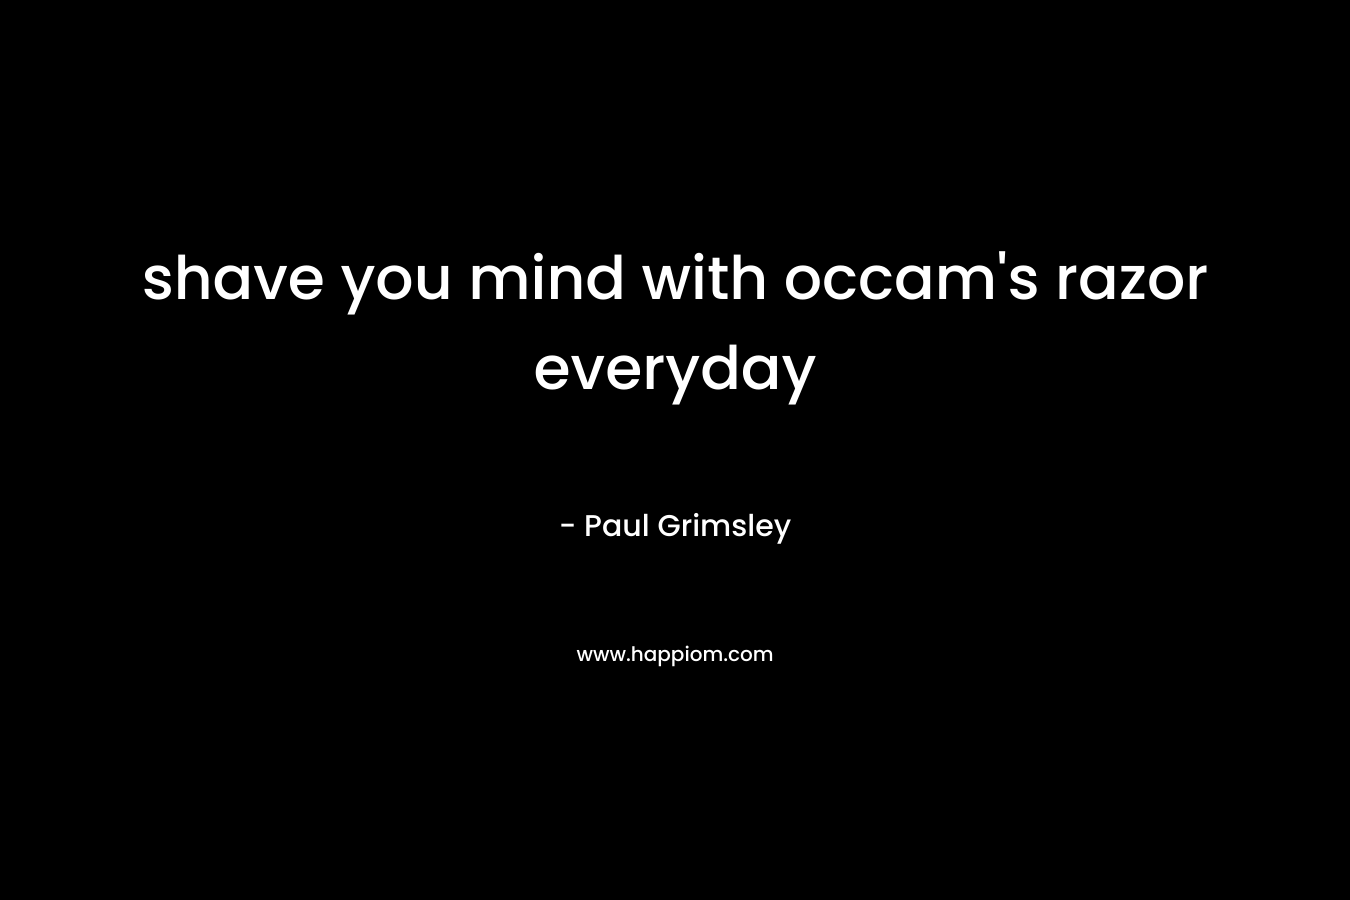 shave you mind with occam’s razor everyday – Paul Grimsley